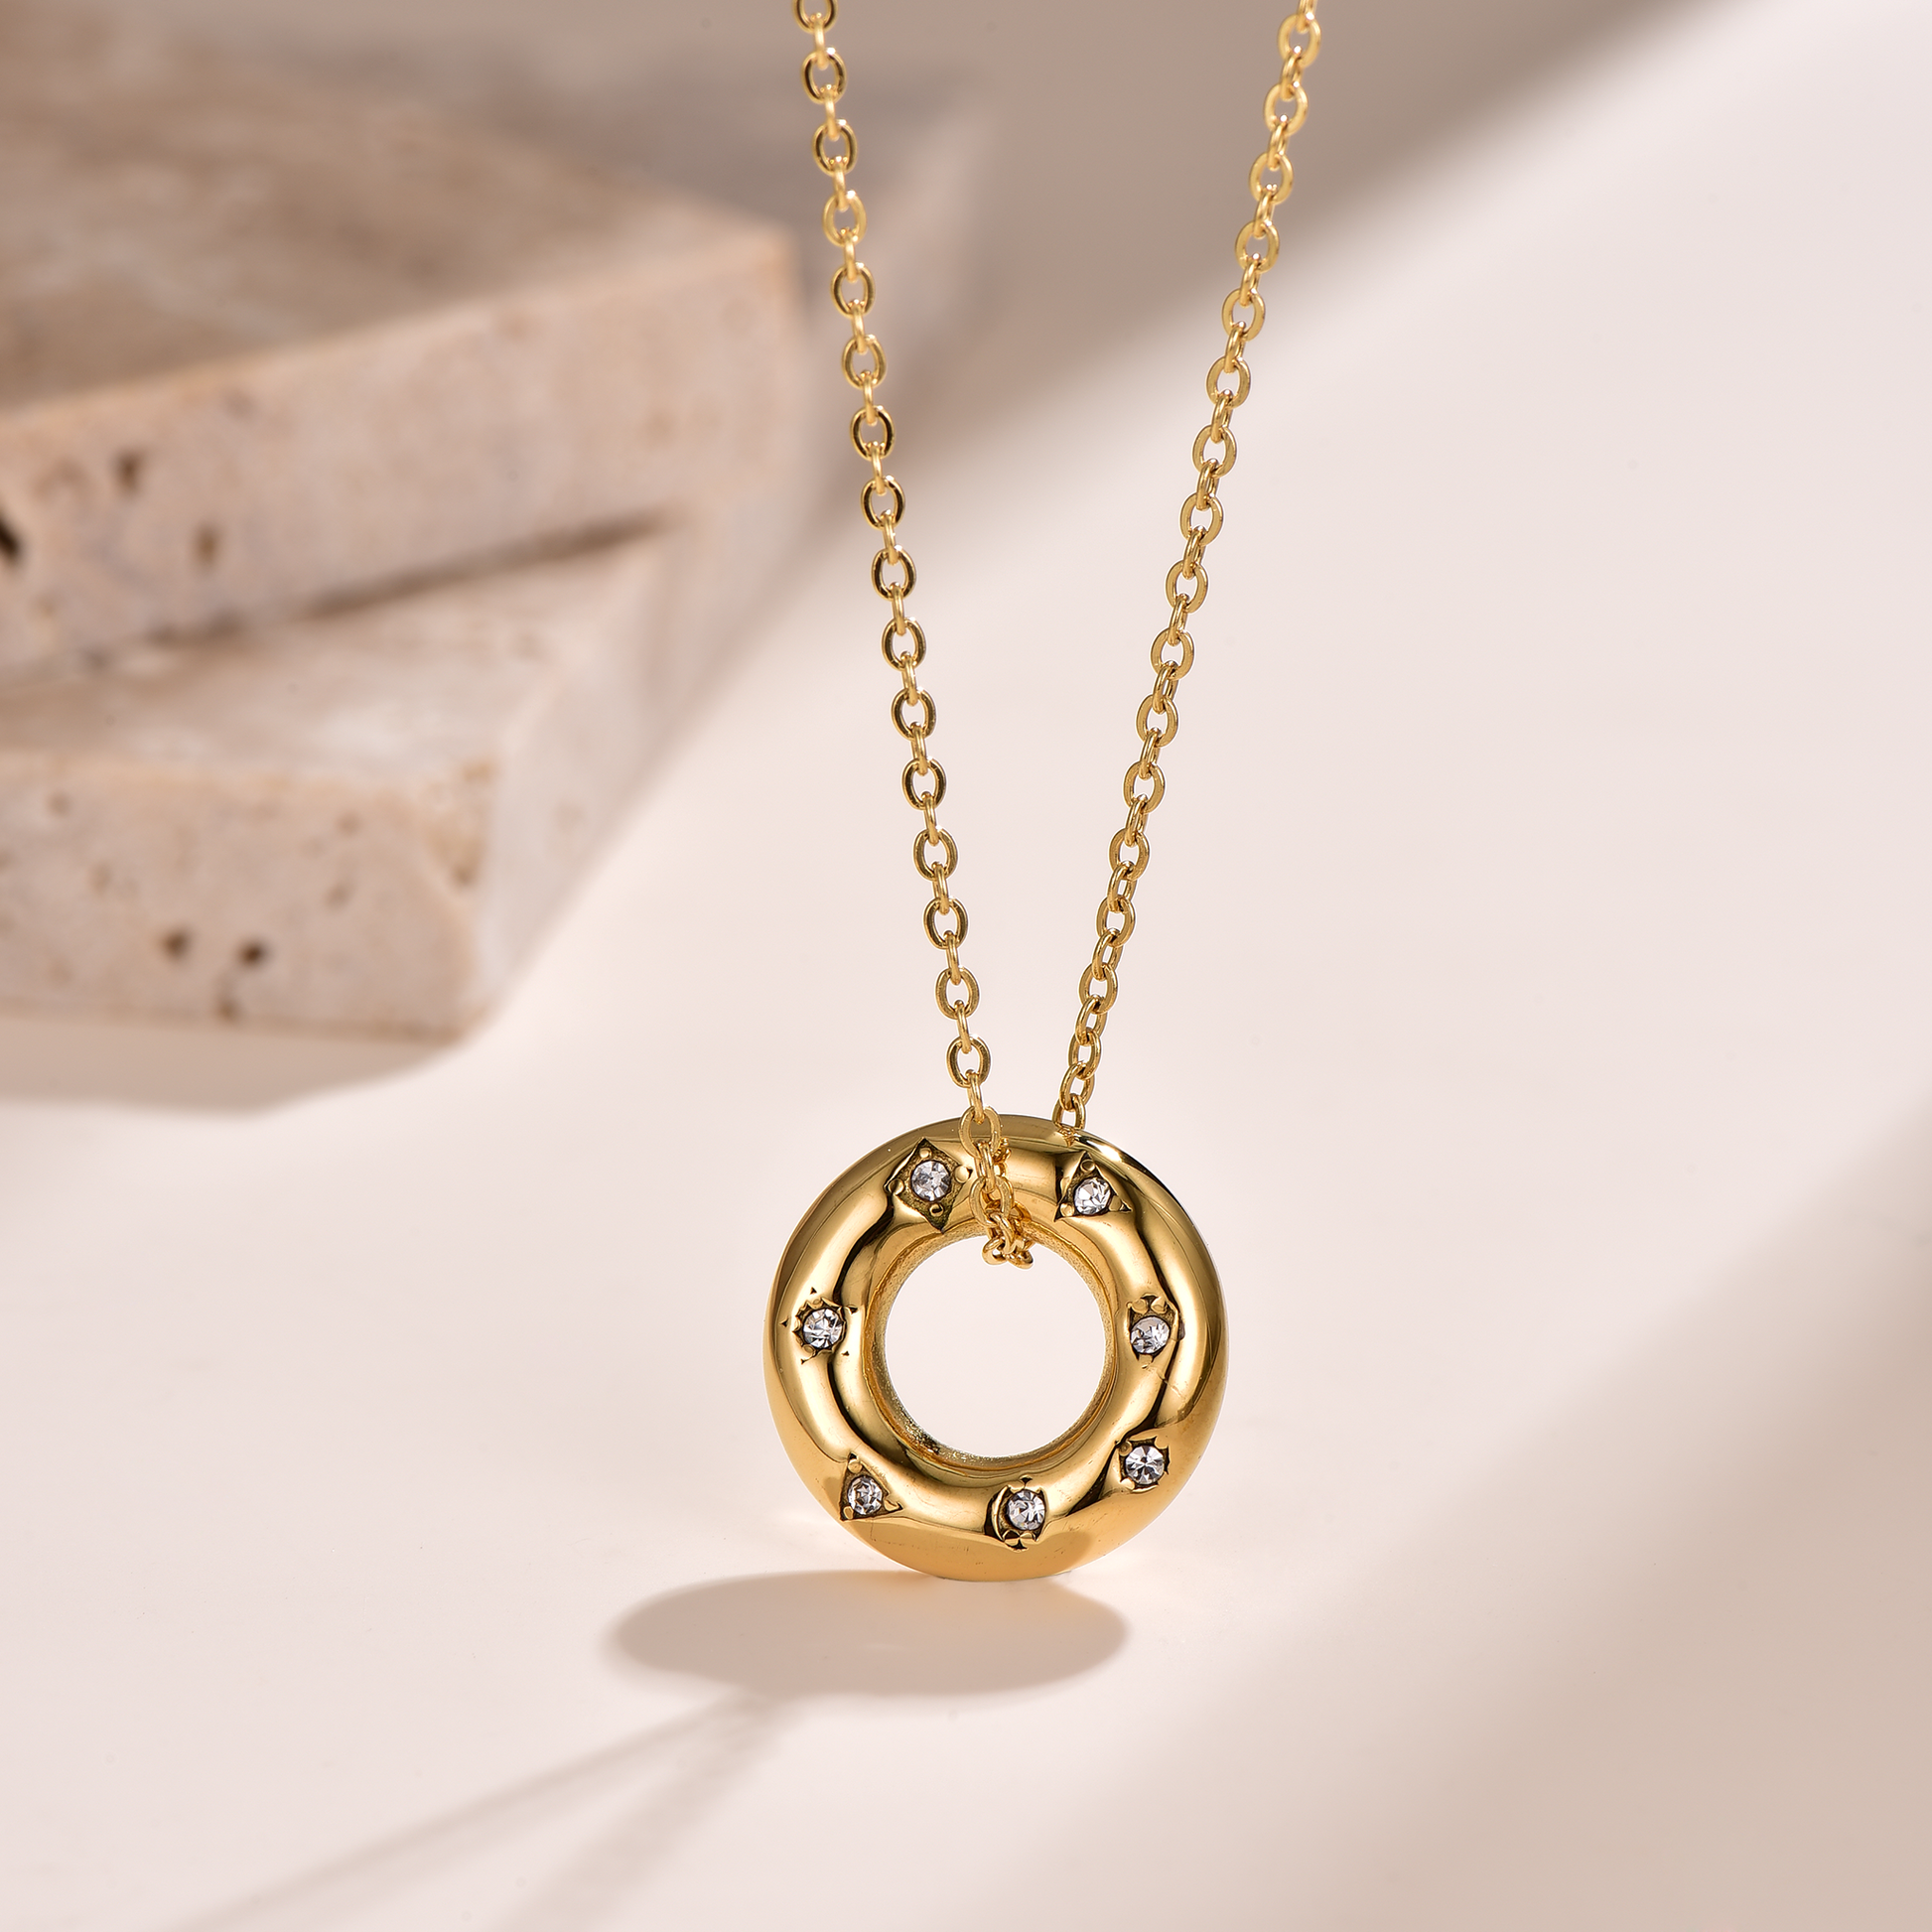 Circle Pendant Necklace - Cubic Zirconia - 18K Gold Plated - Hypoallergenic - Necklace - ONNNIII